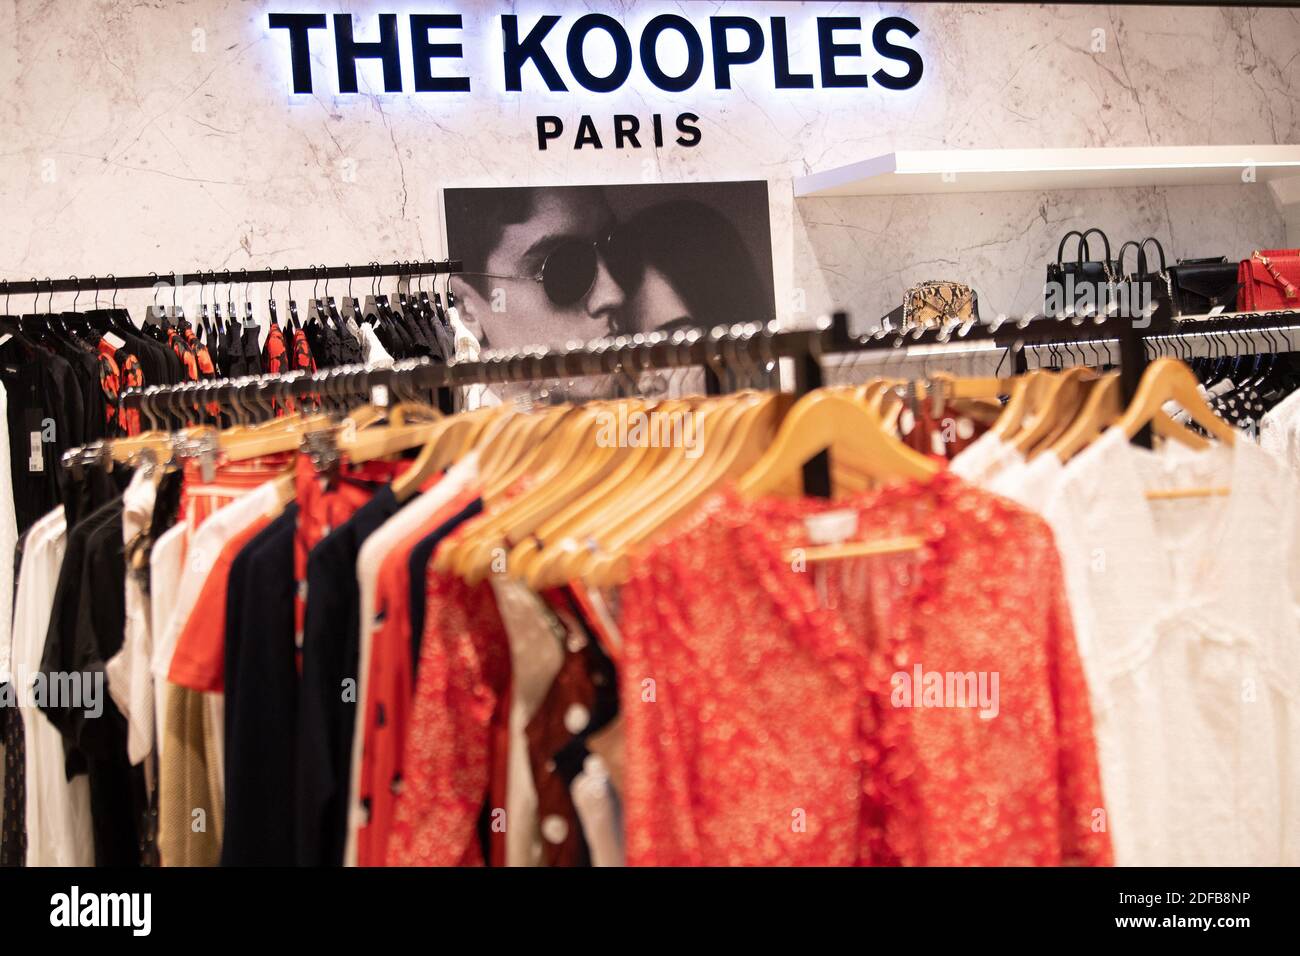 A shop sign of THE KOOPLES, on June 26, 2020 in Orly, 13 km south of Paris, France. Photo by David Niviere/ABACAPRESS.COM Stock Photo